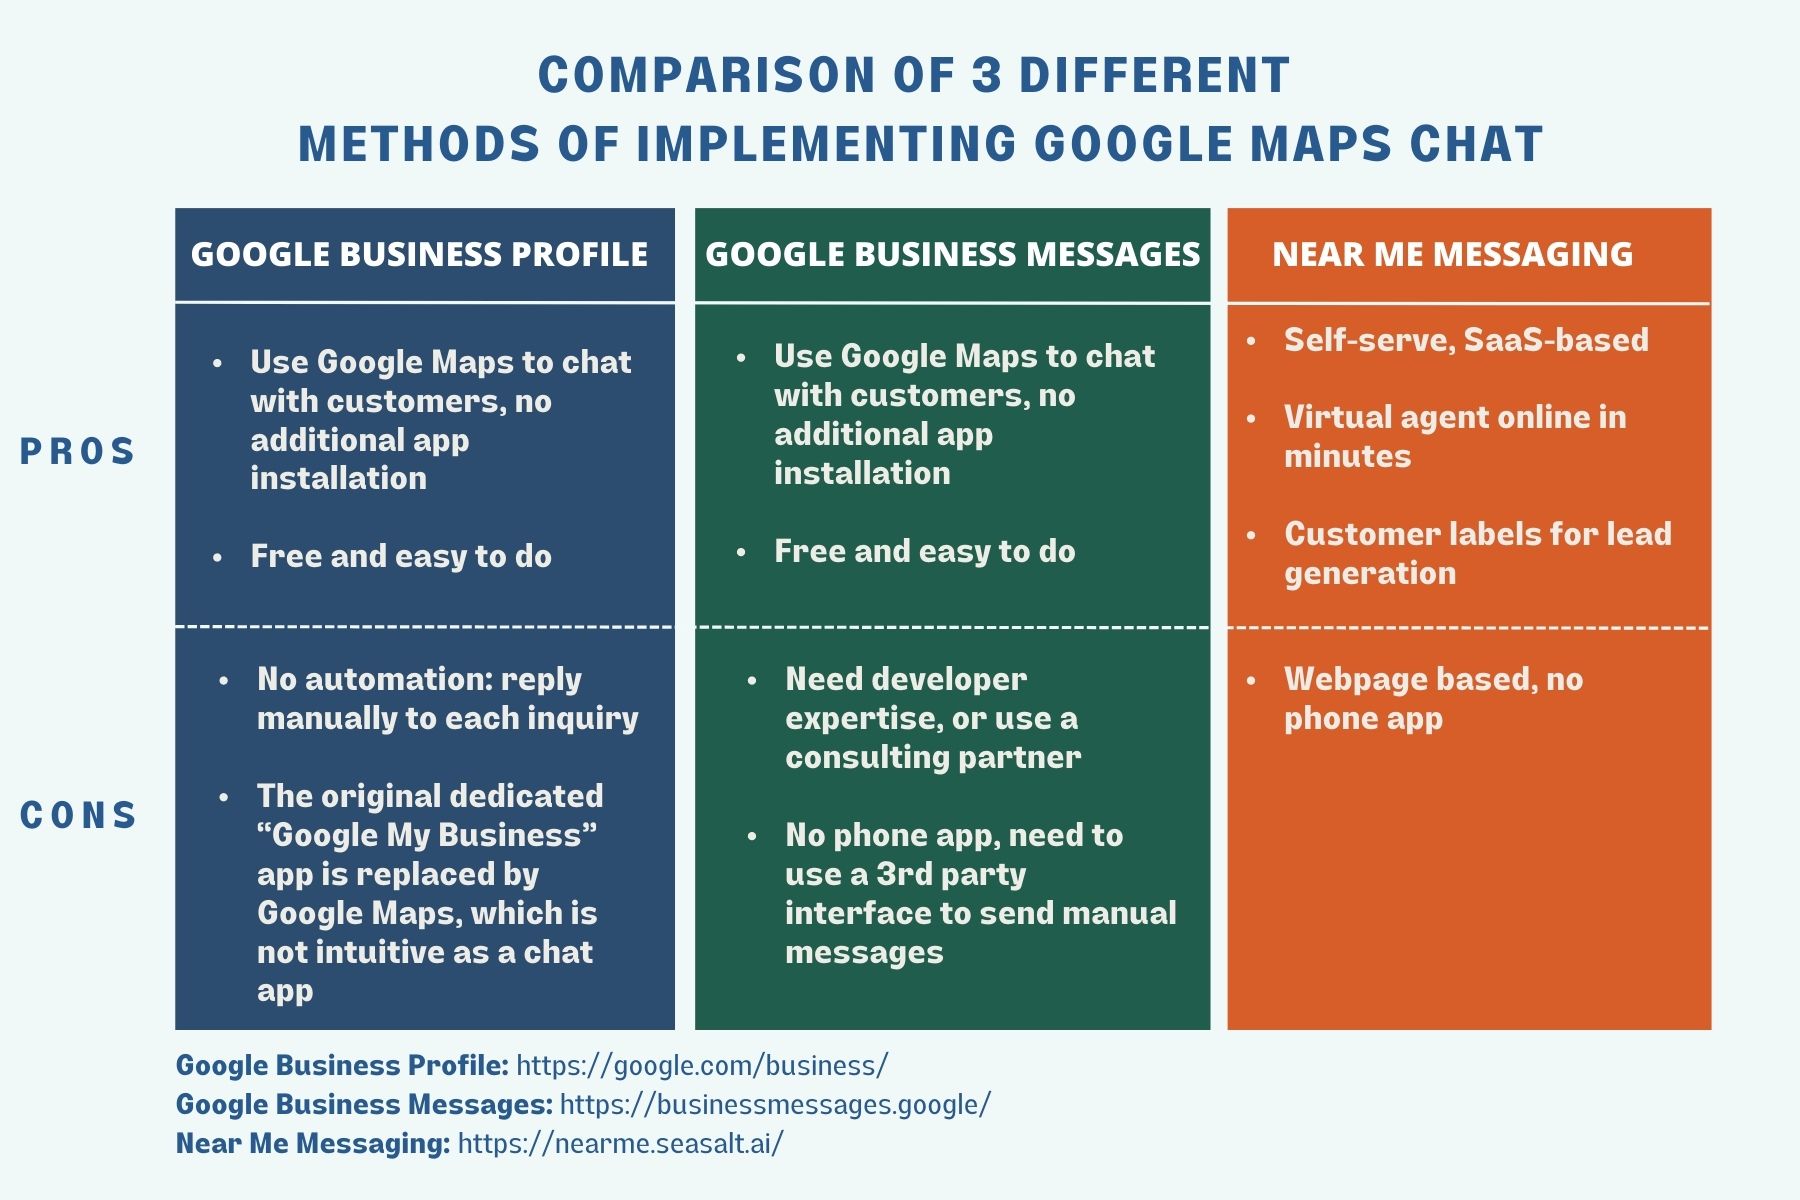 Comparison of 3 different methods of implementing Google Maps Chat with Google Business Profile, Google Business Messages, and Near Me Messaging